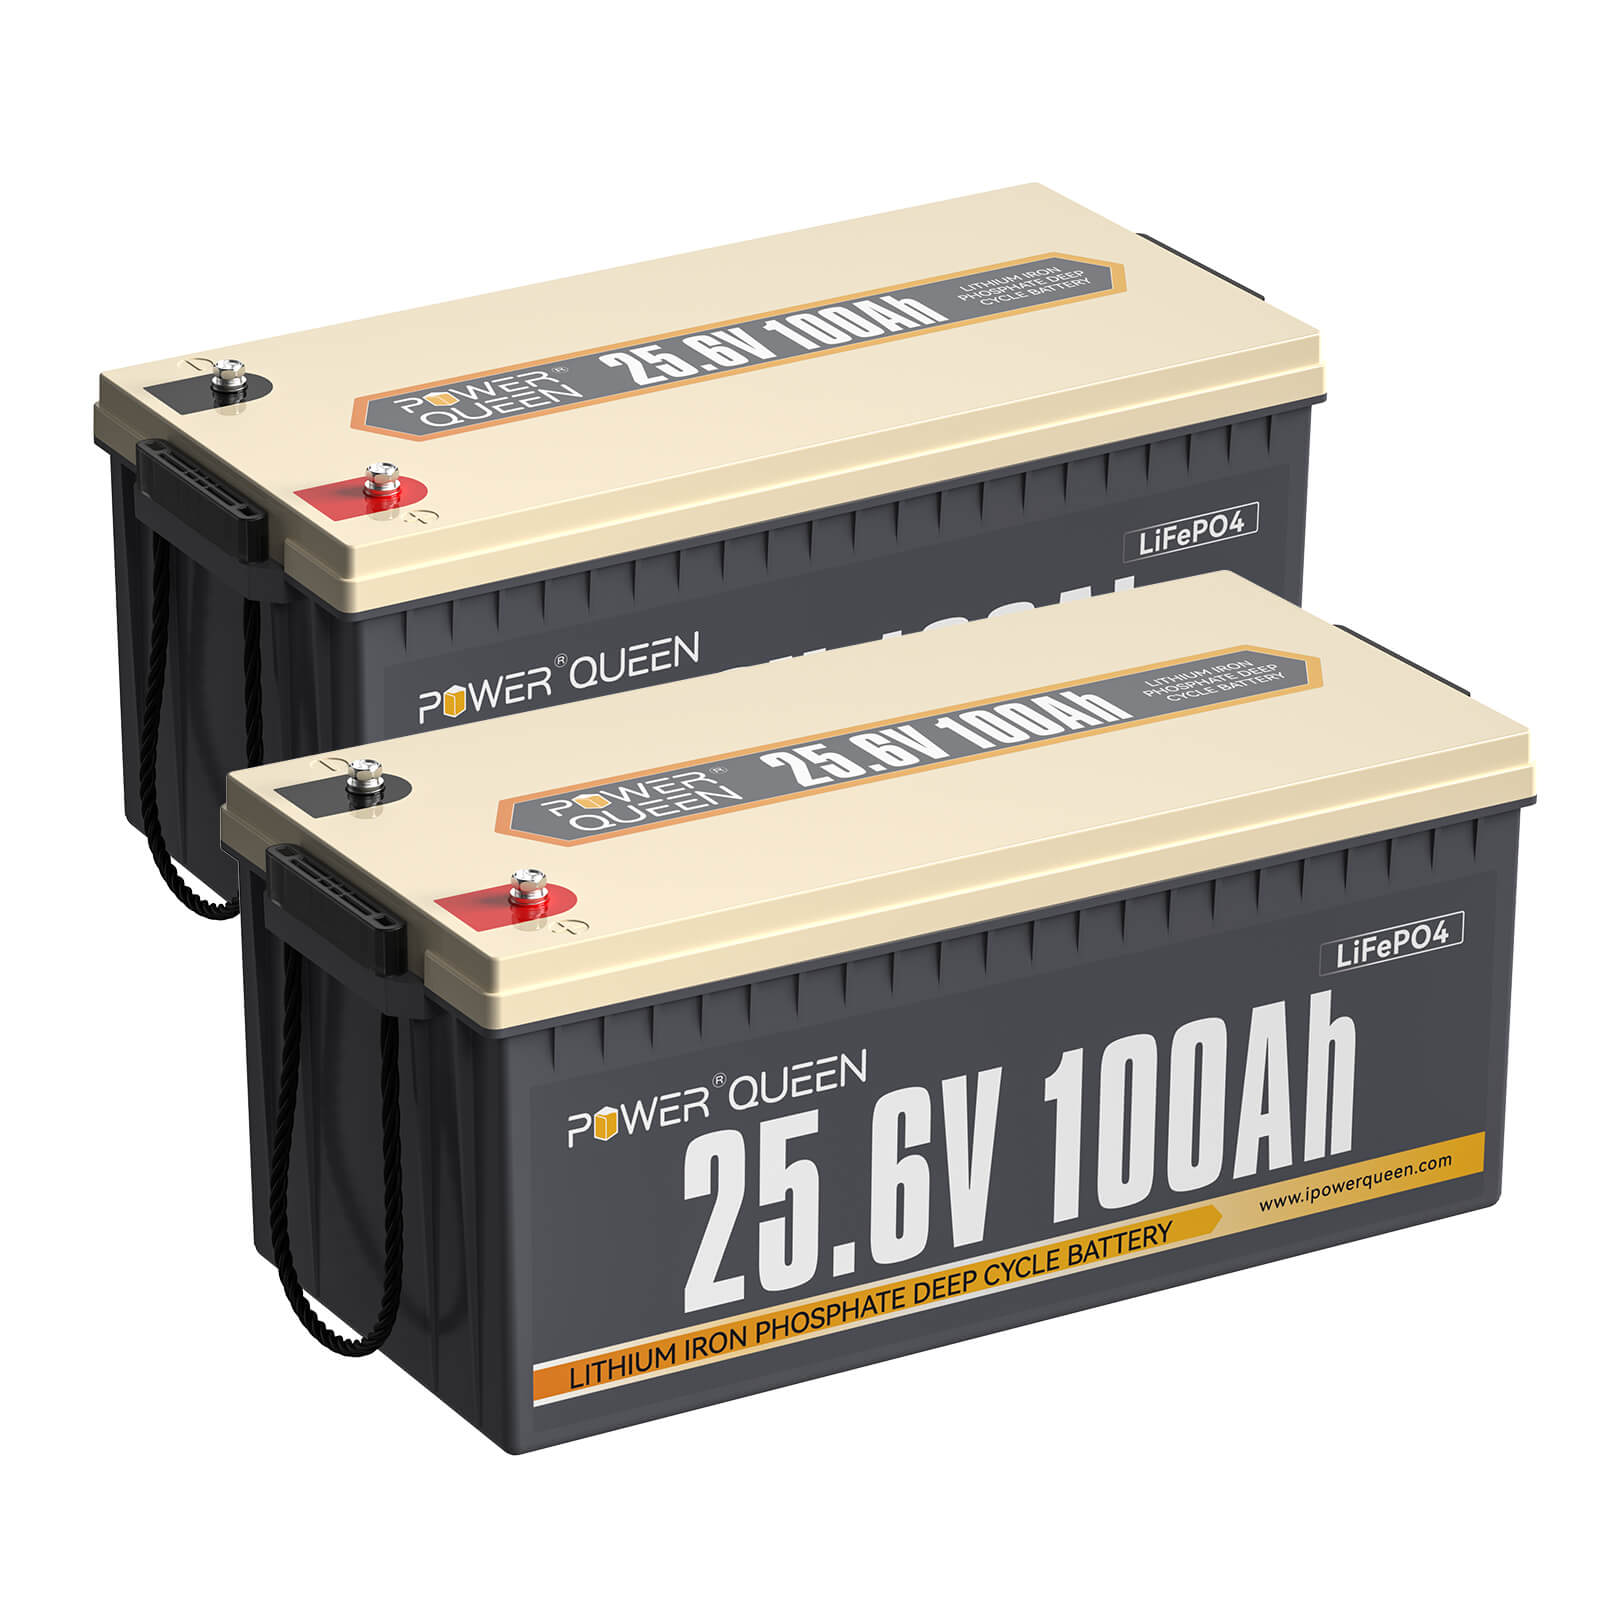 Power Queen 25.6V 100Ah LiFePO4 battery, built-in 100A BMS